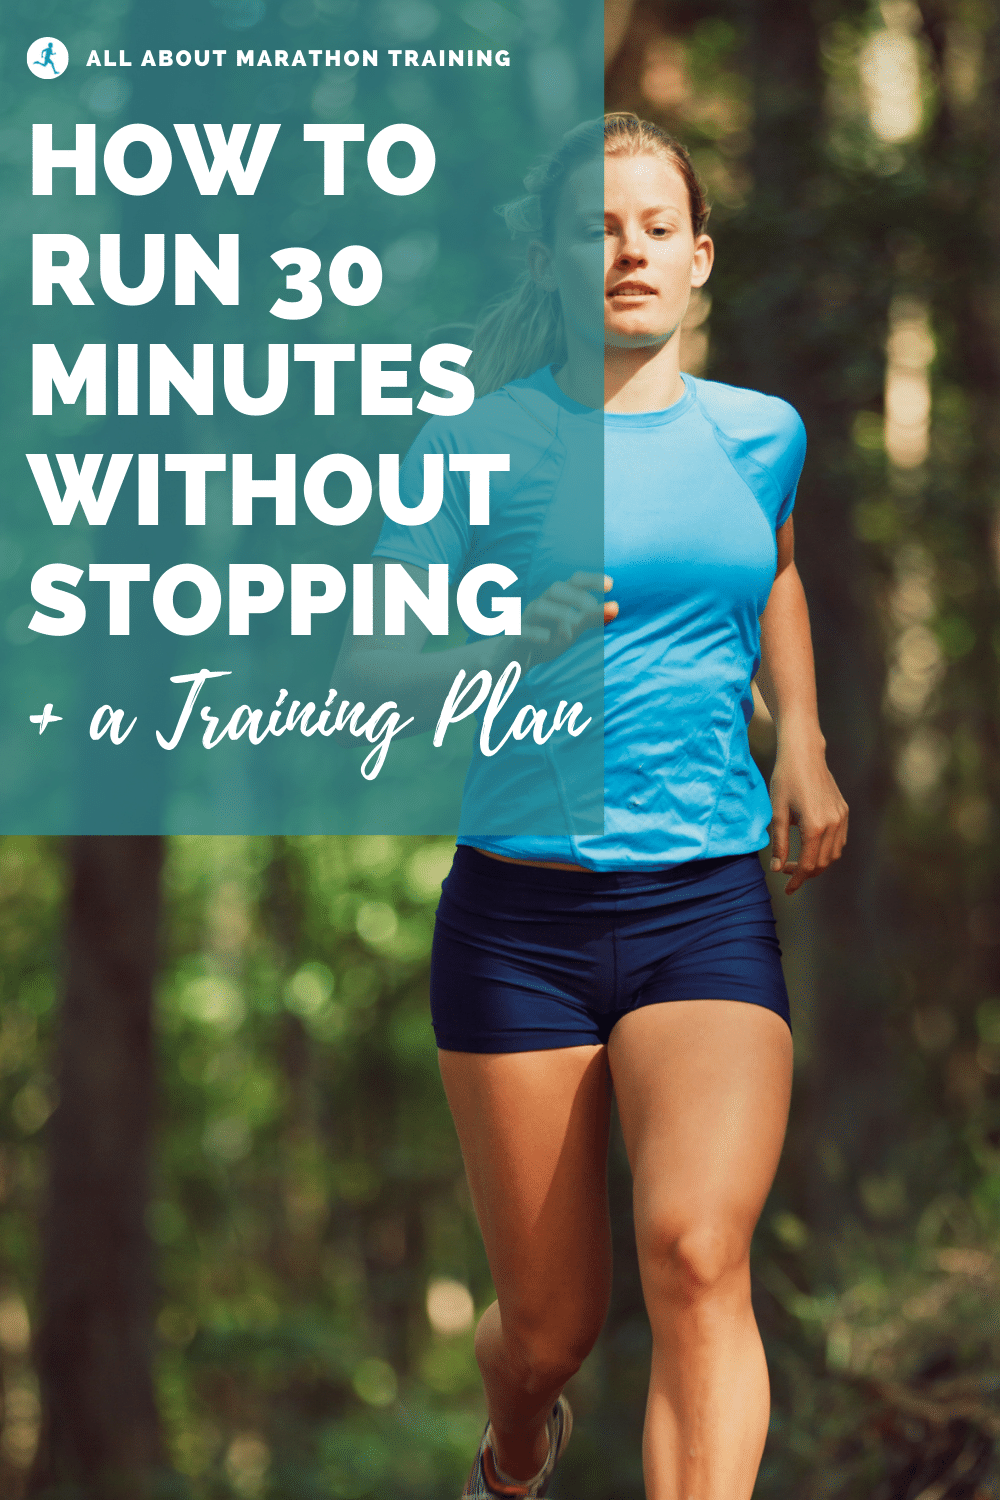 How to Build Up to Running Without a Break for 30 Minutes - Run For Good